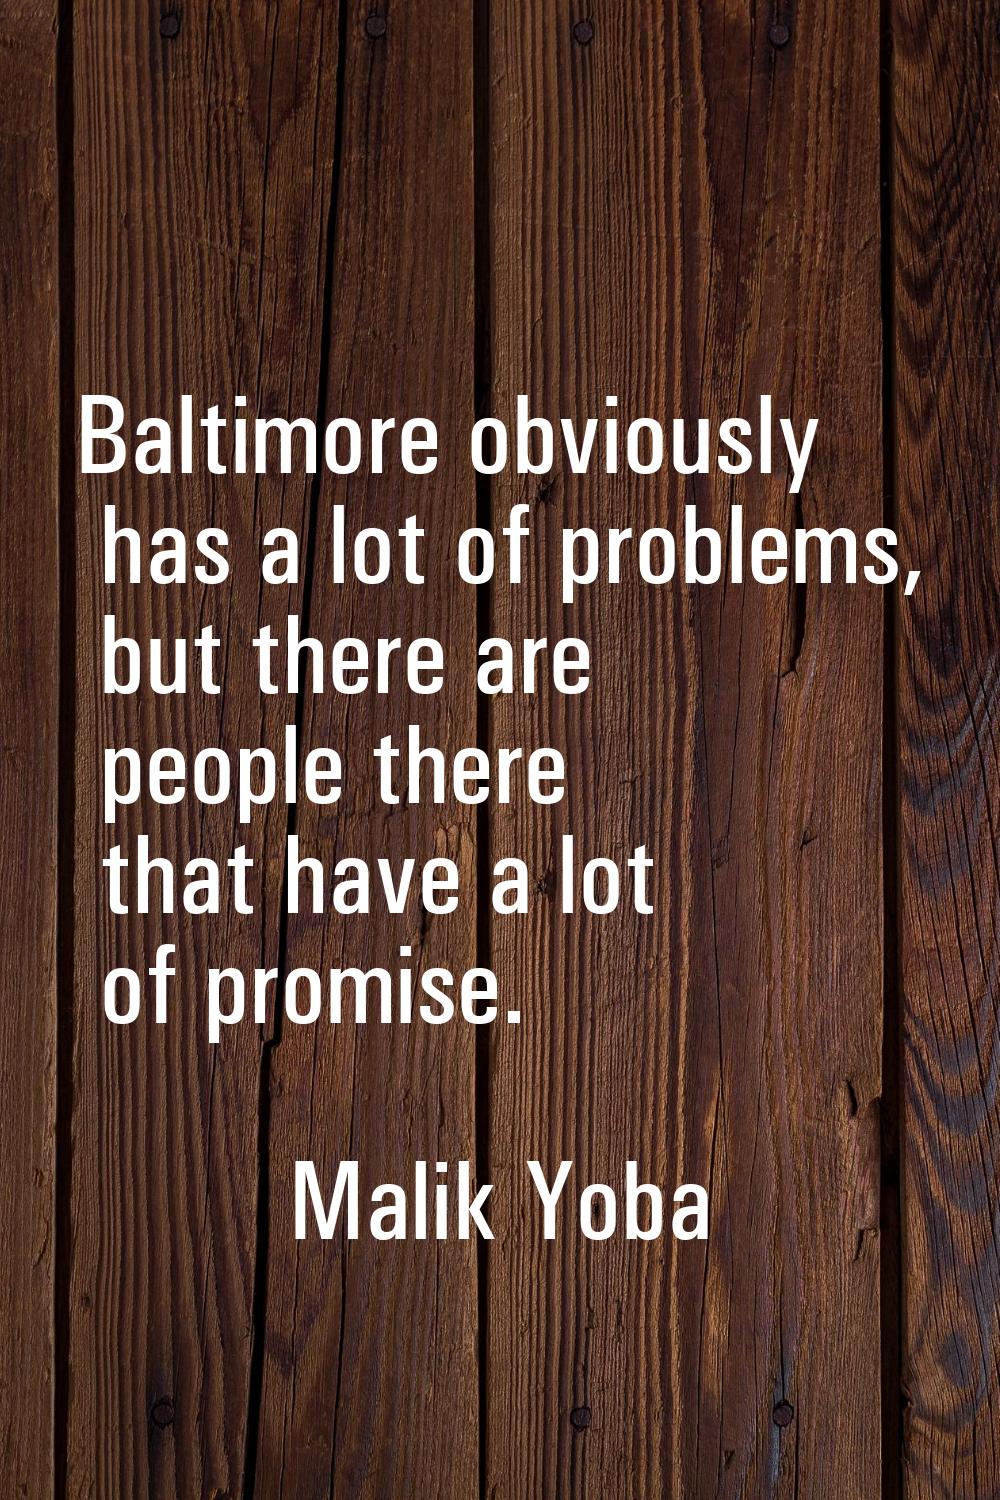 Baltimore obviously has a lot of problems, but there are people there that have a lot of promise.